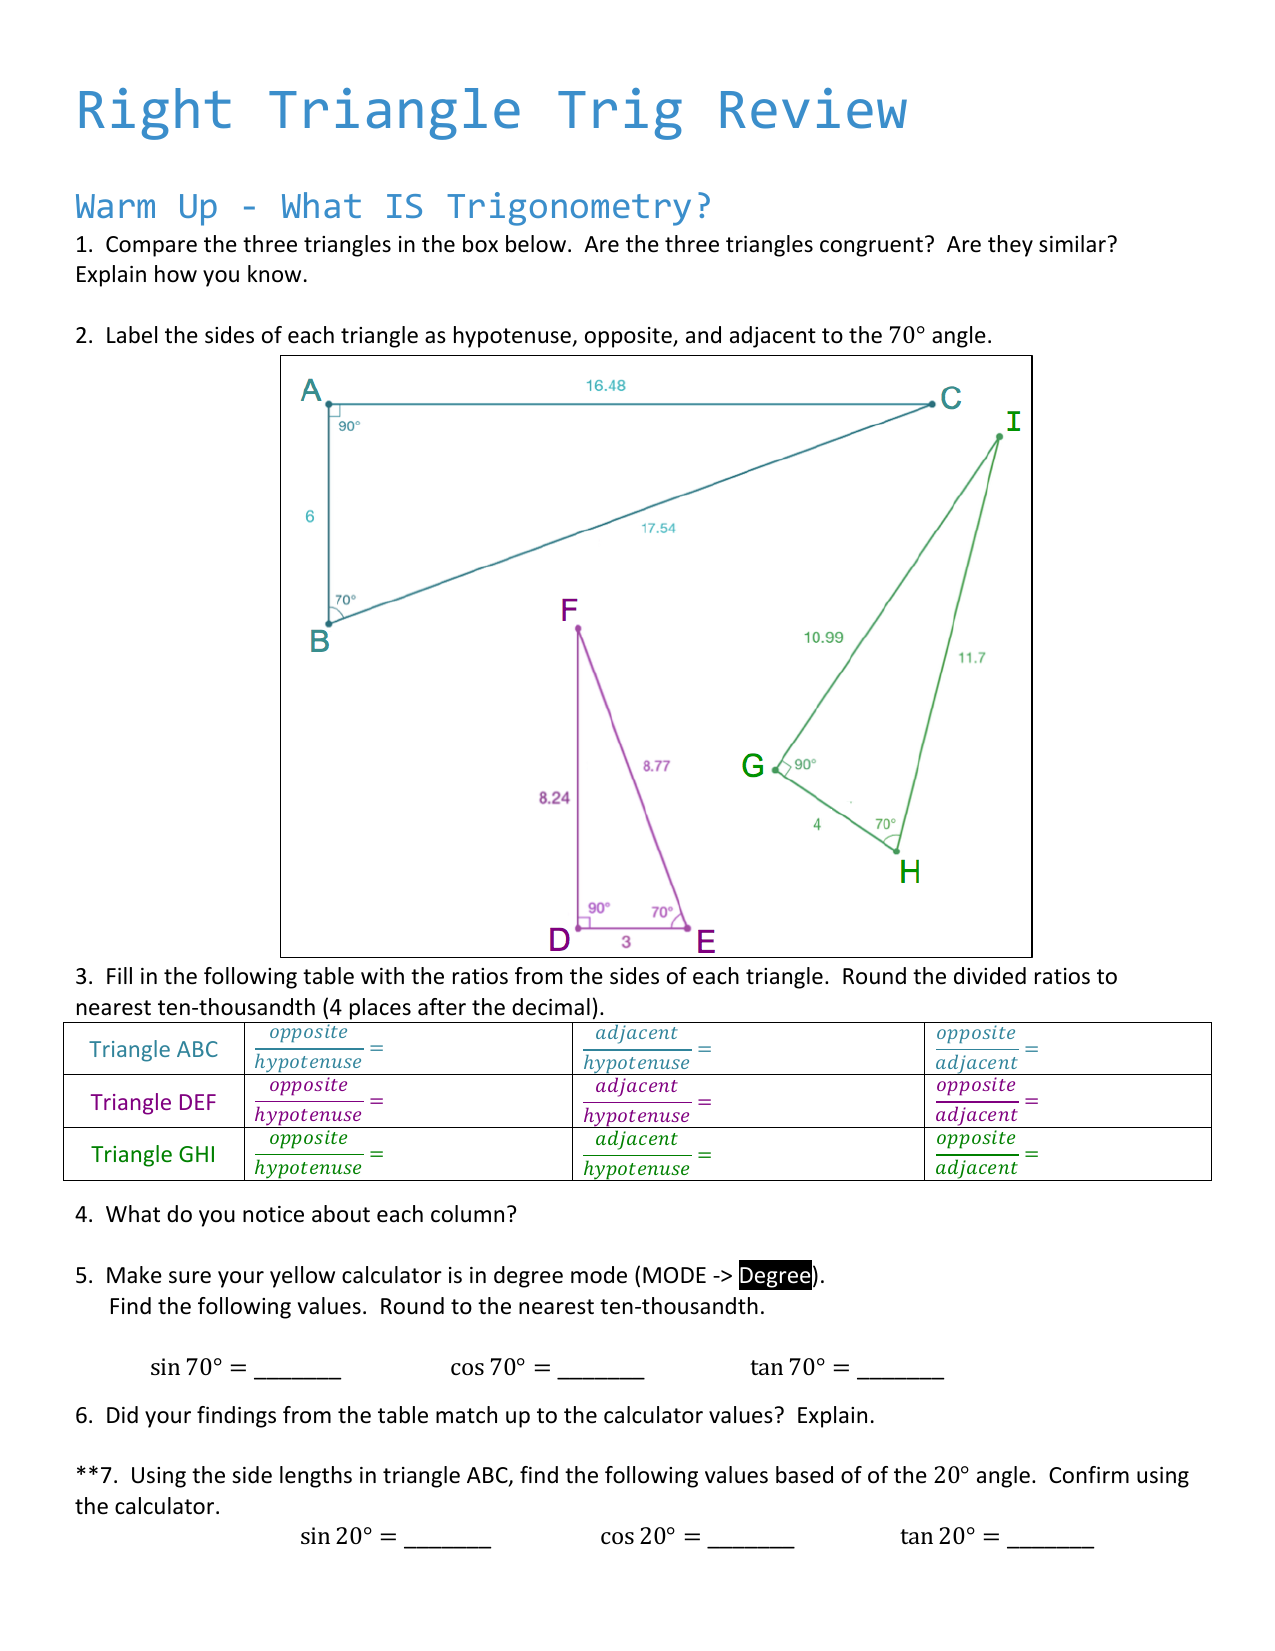 Right Triangle Trig Worksheet Answers - Worksheet List For Right Triangle Trigonometry Worksheet Answers